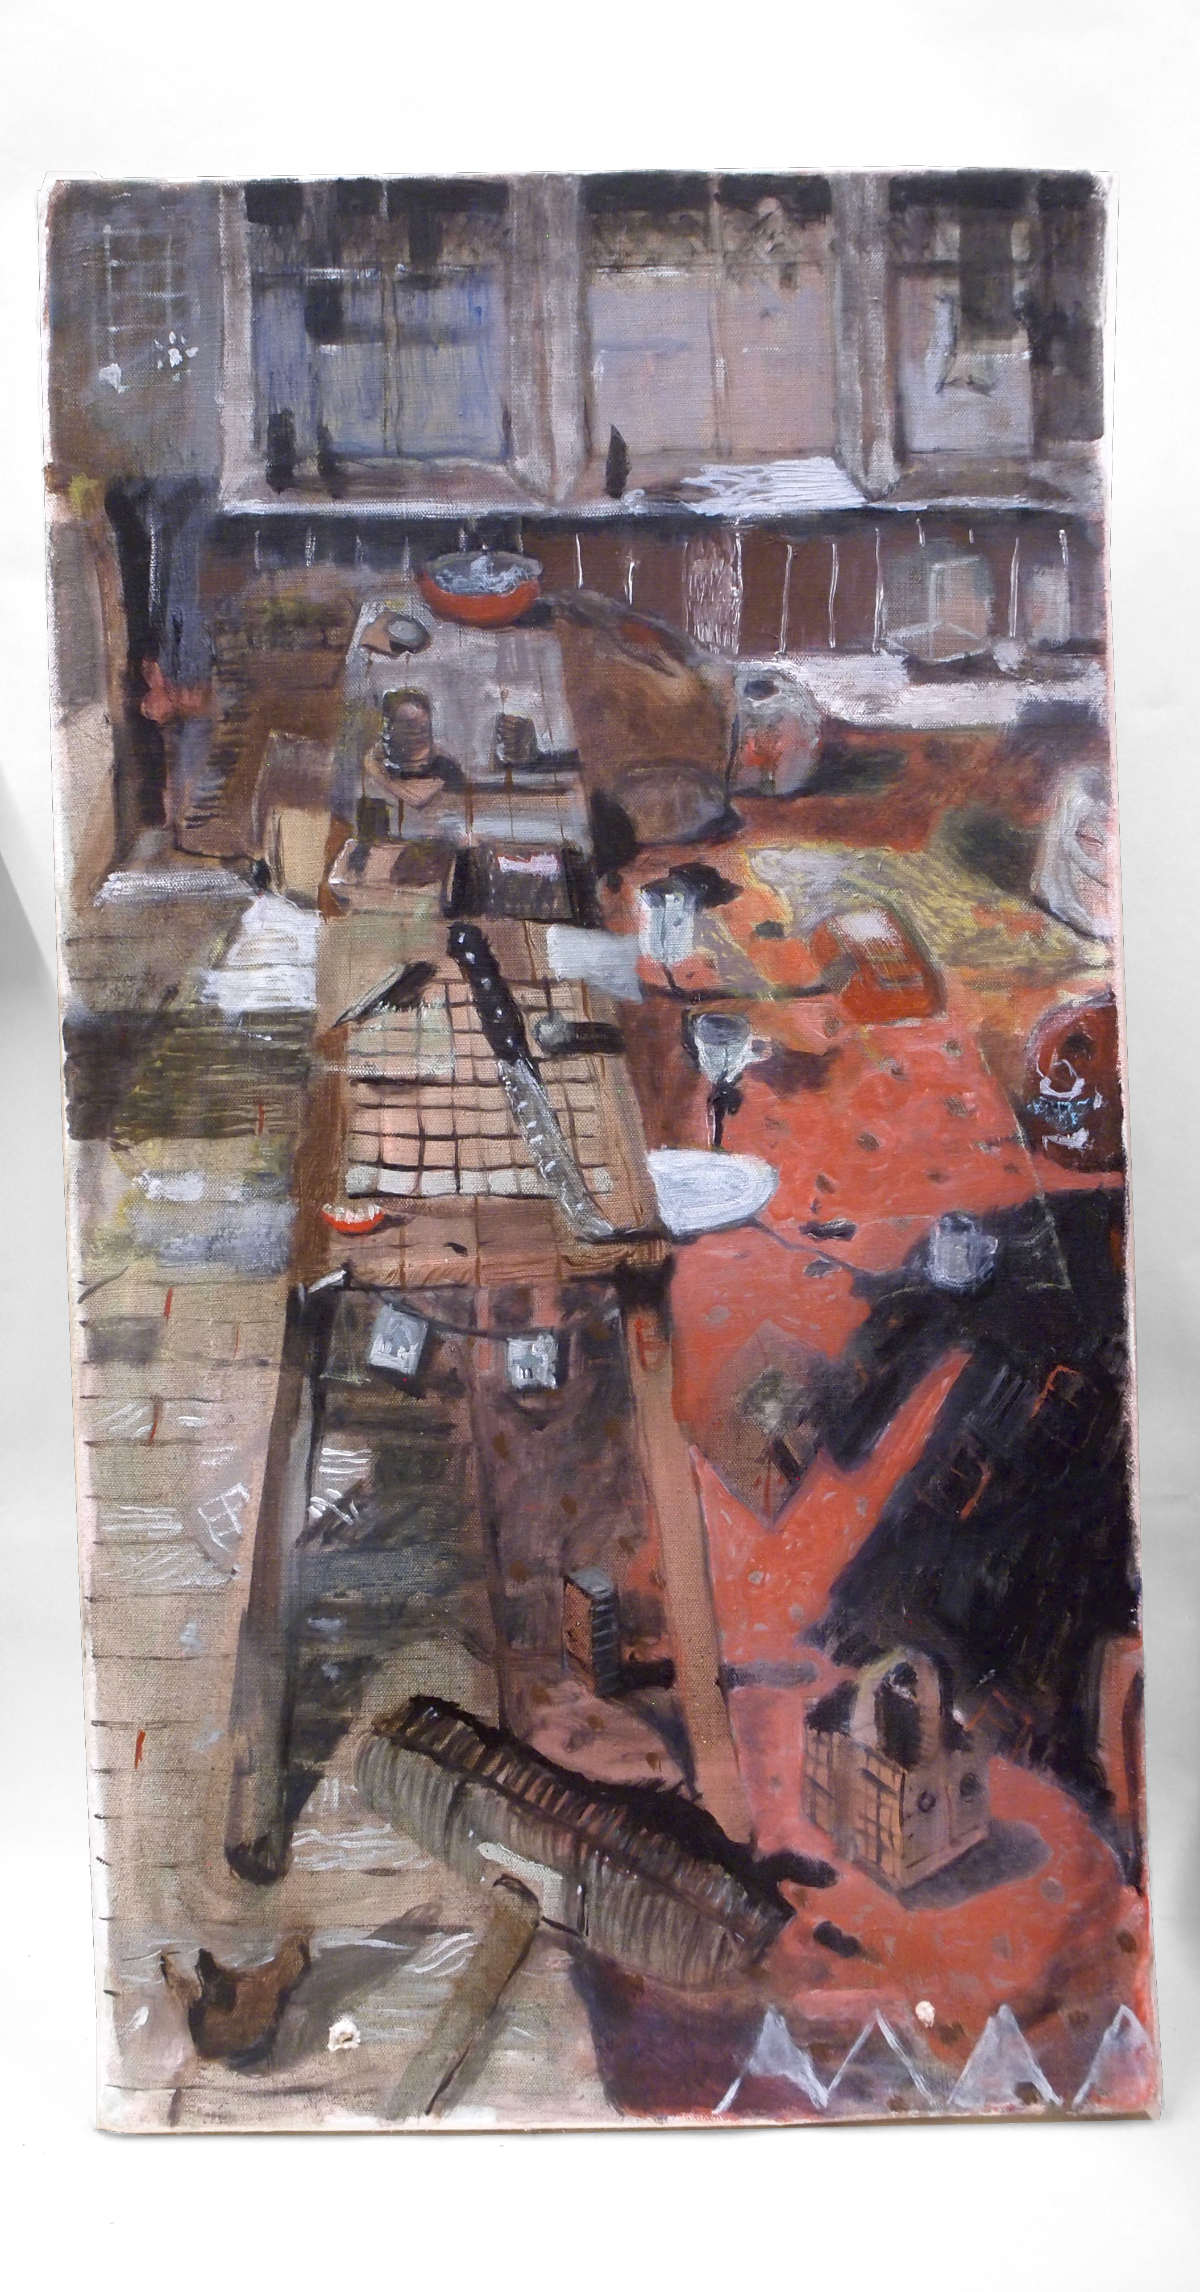 Photo of a painting showing a table and red room strewn with objects.